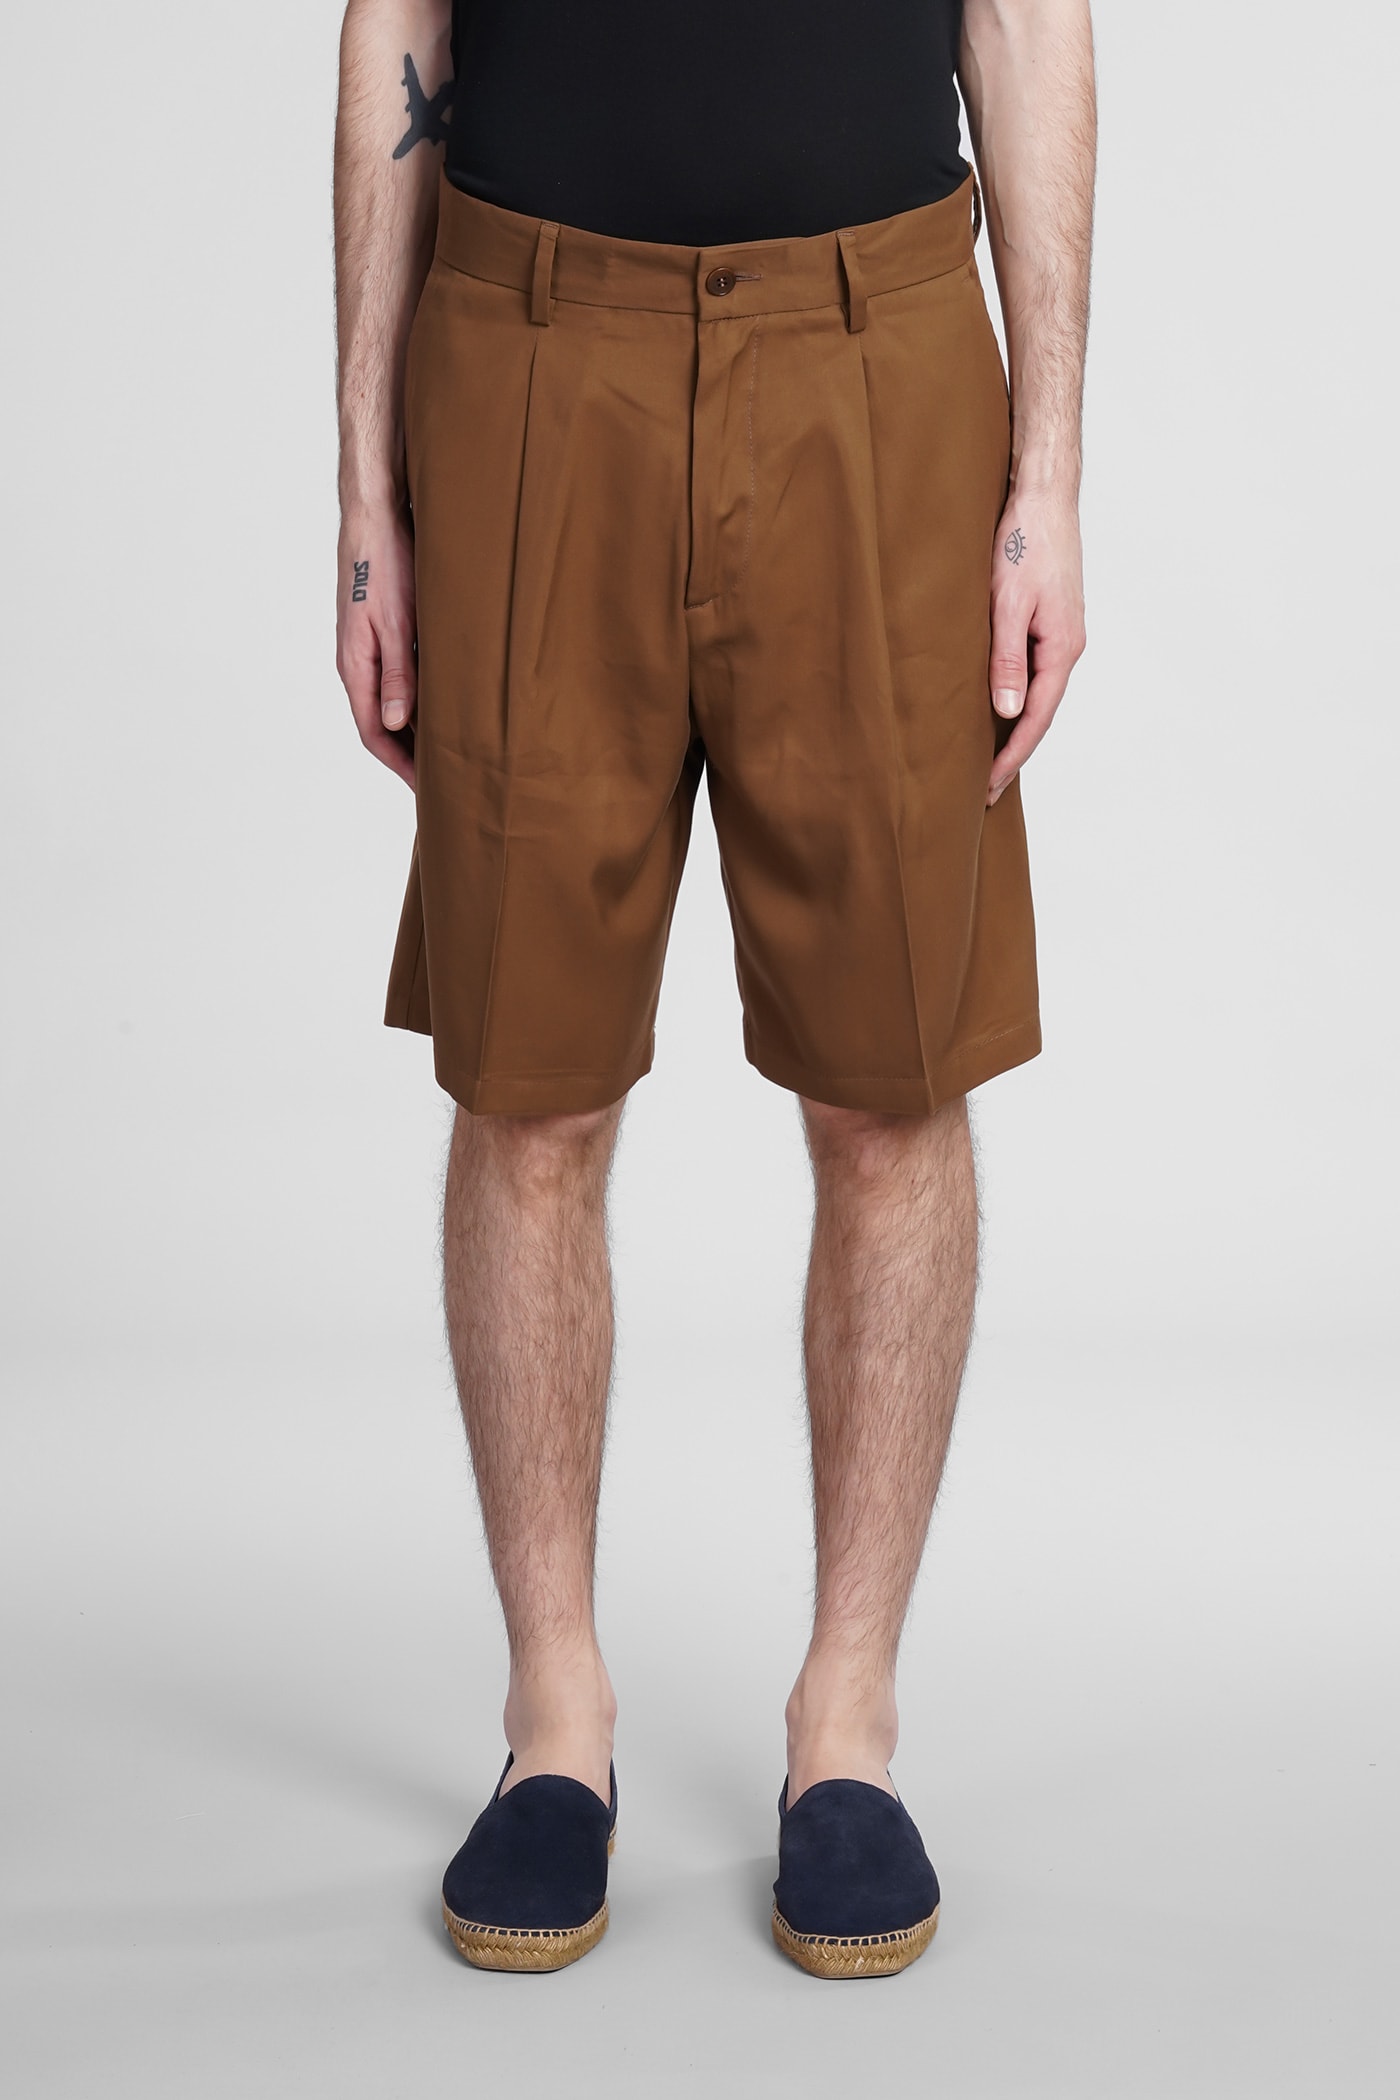 COSTUMEIN SHORTS IN BROWN POLYESTER